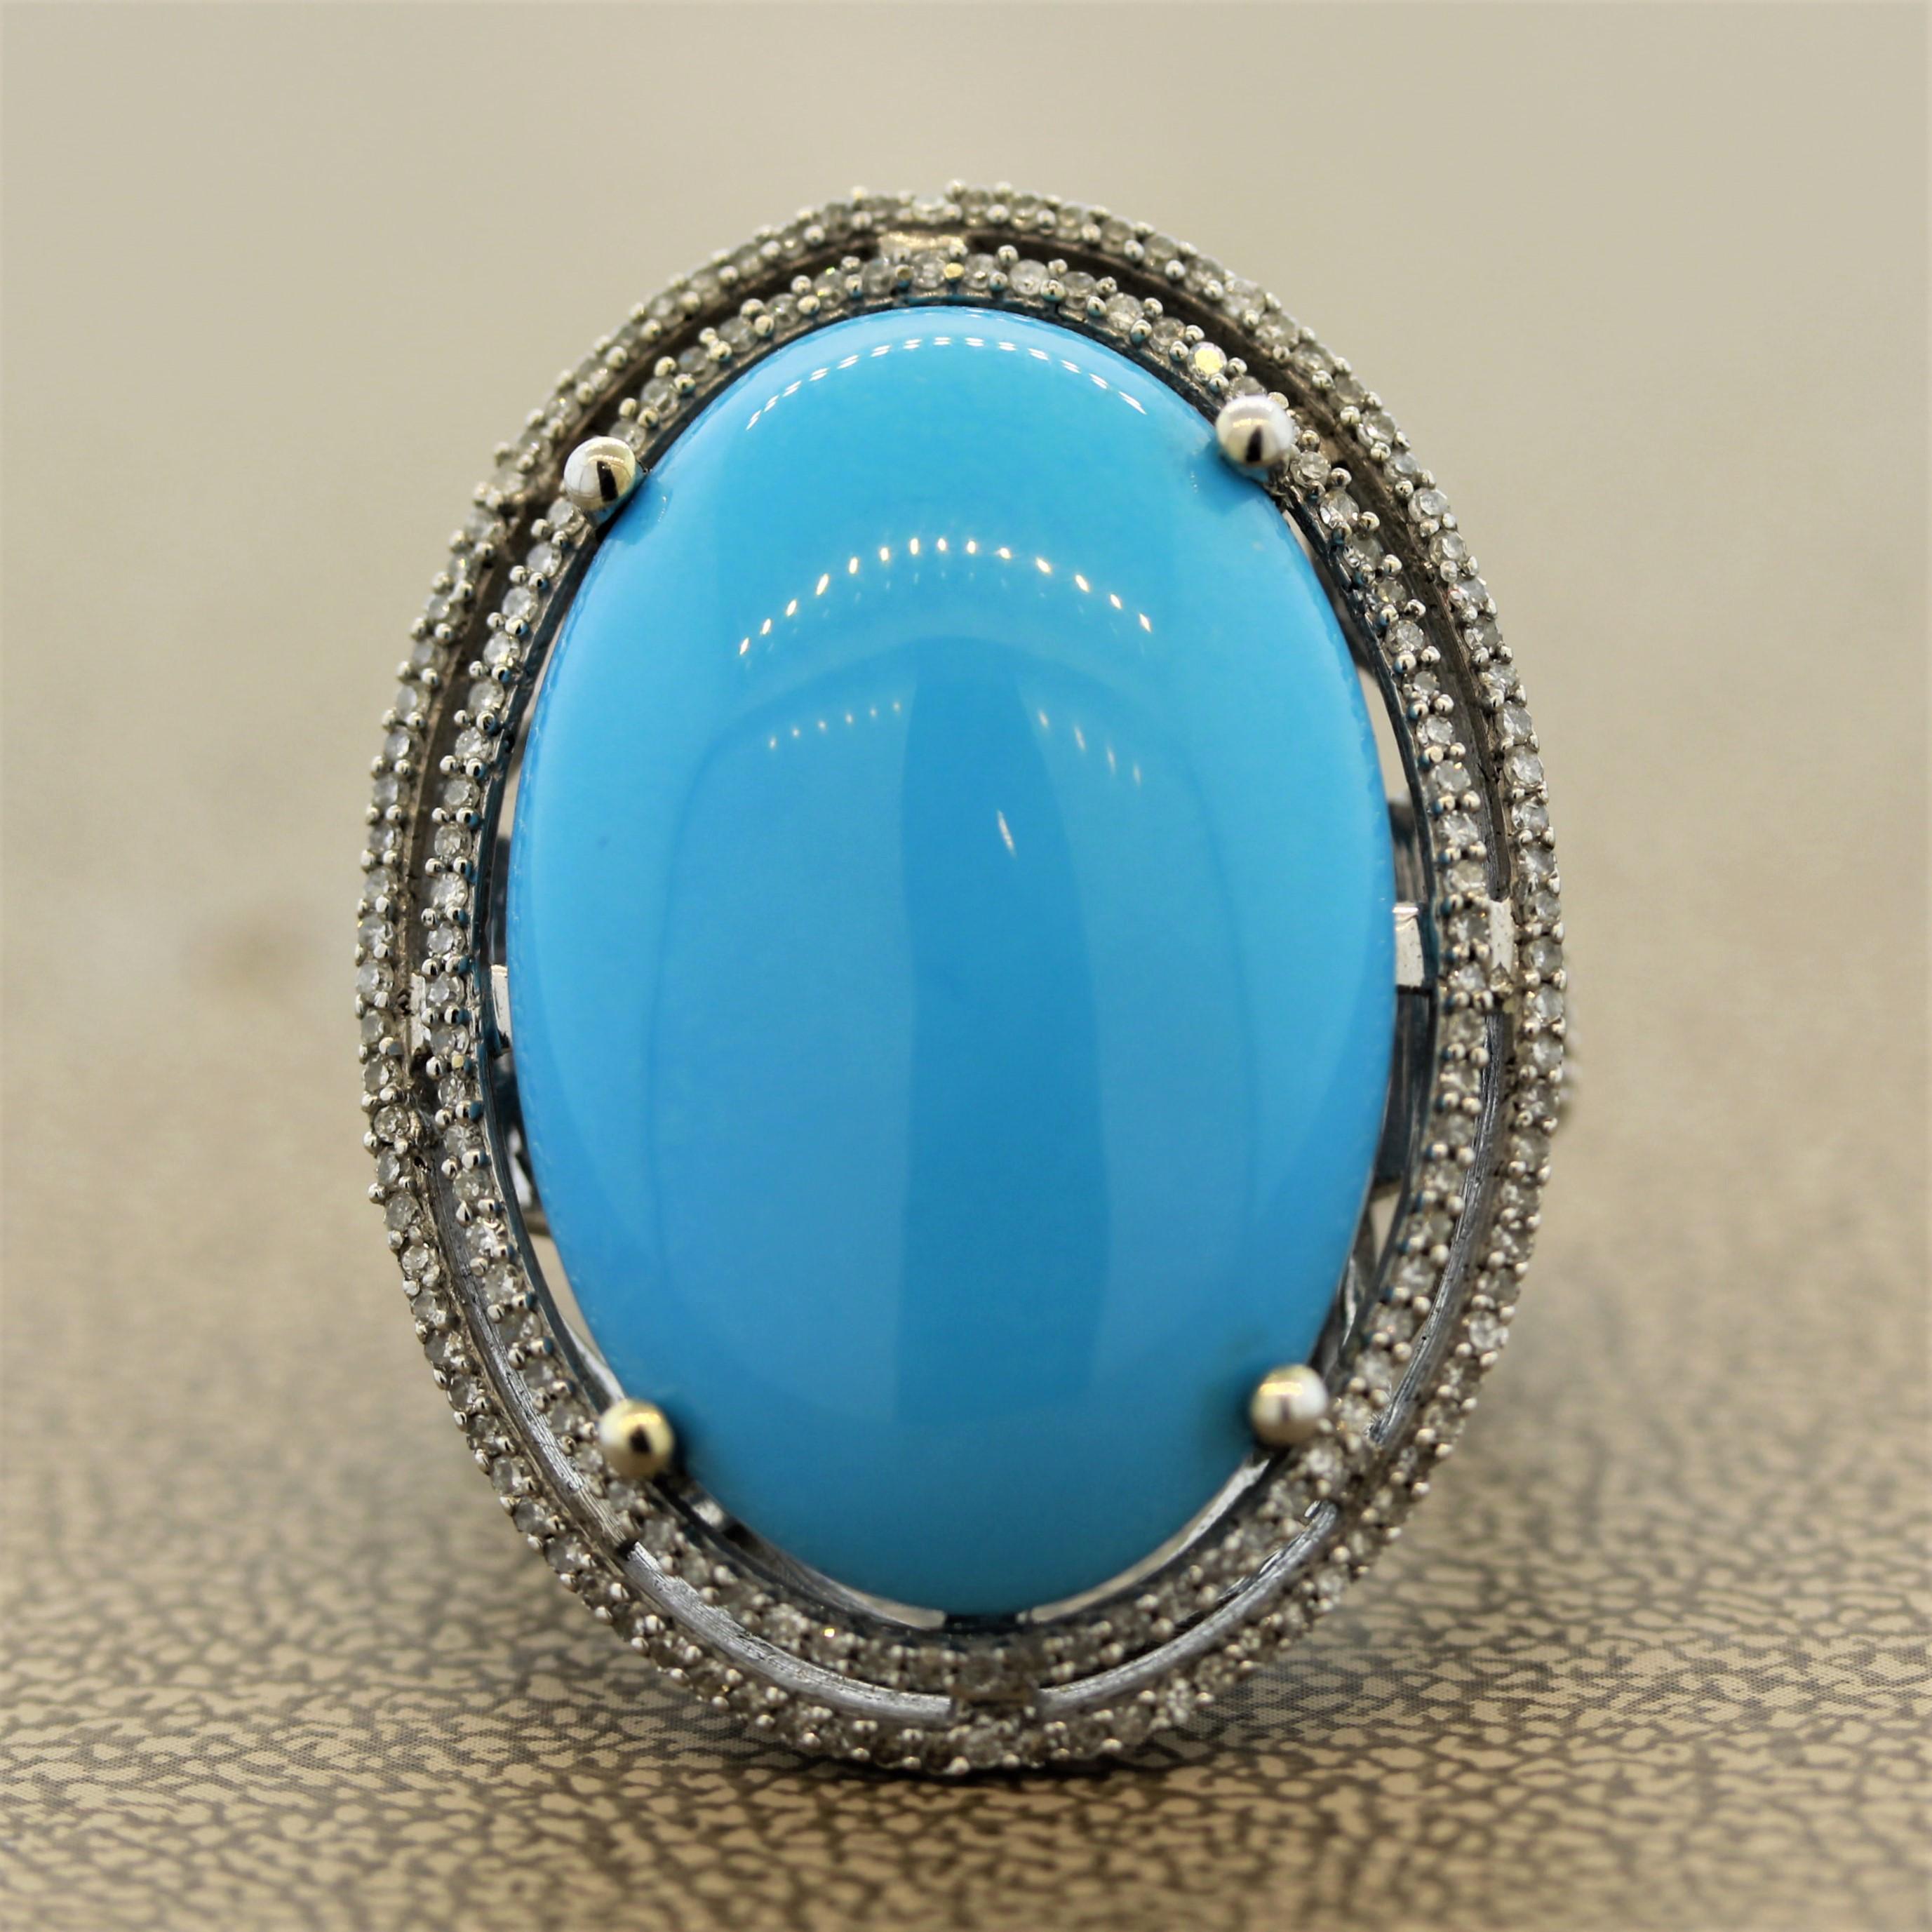 A large cocktail ring featuring a very fine sky-blue turquoise from Persia. It measures 26.8 x 18.5 millimeters and is accented by single cut diamonds making two halos around the turquoise and running down along the shoulders of the ring. Made in